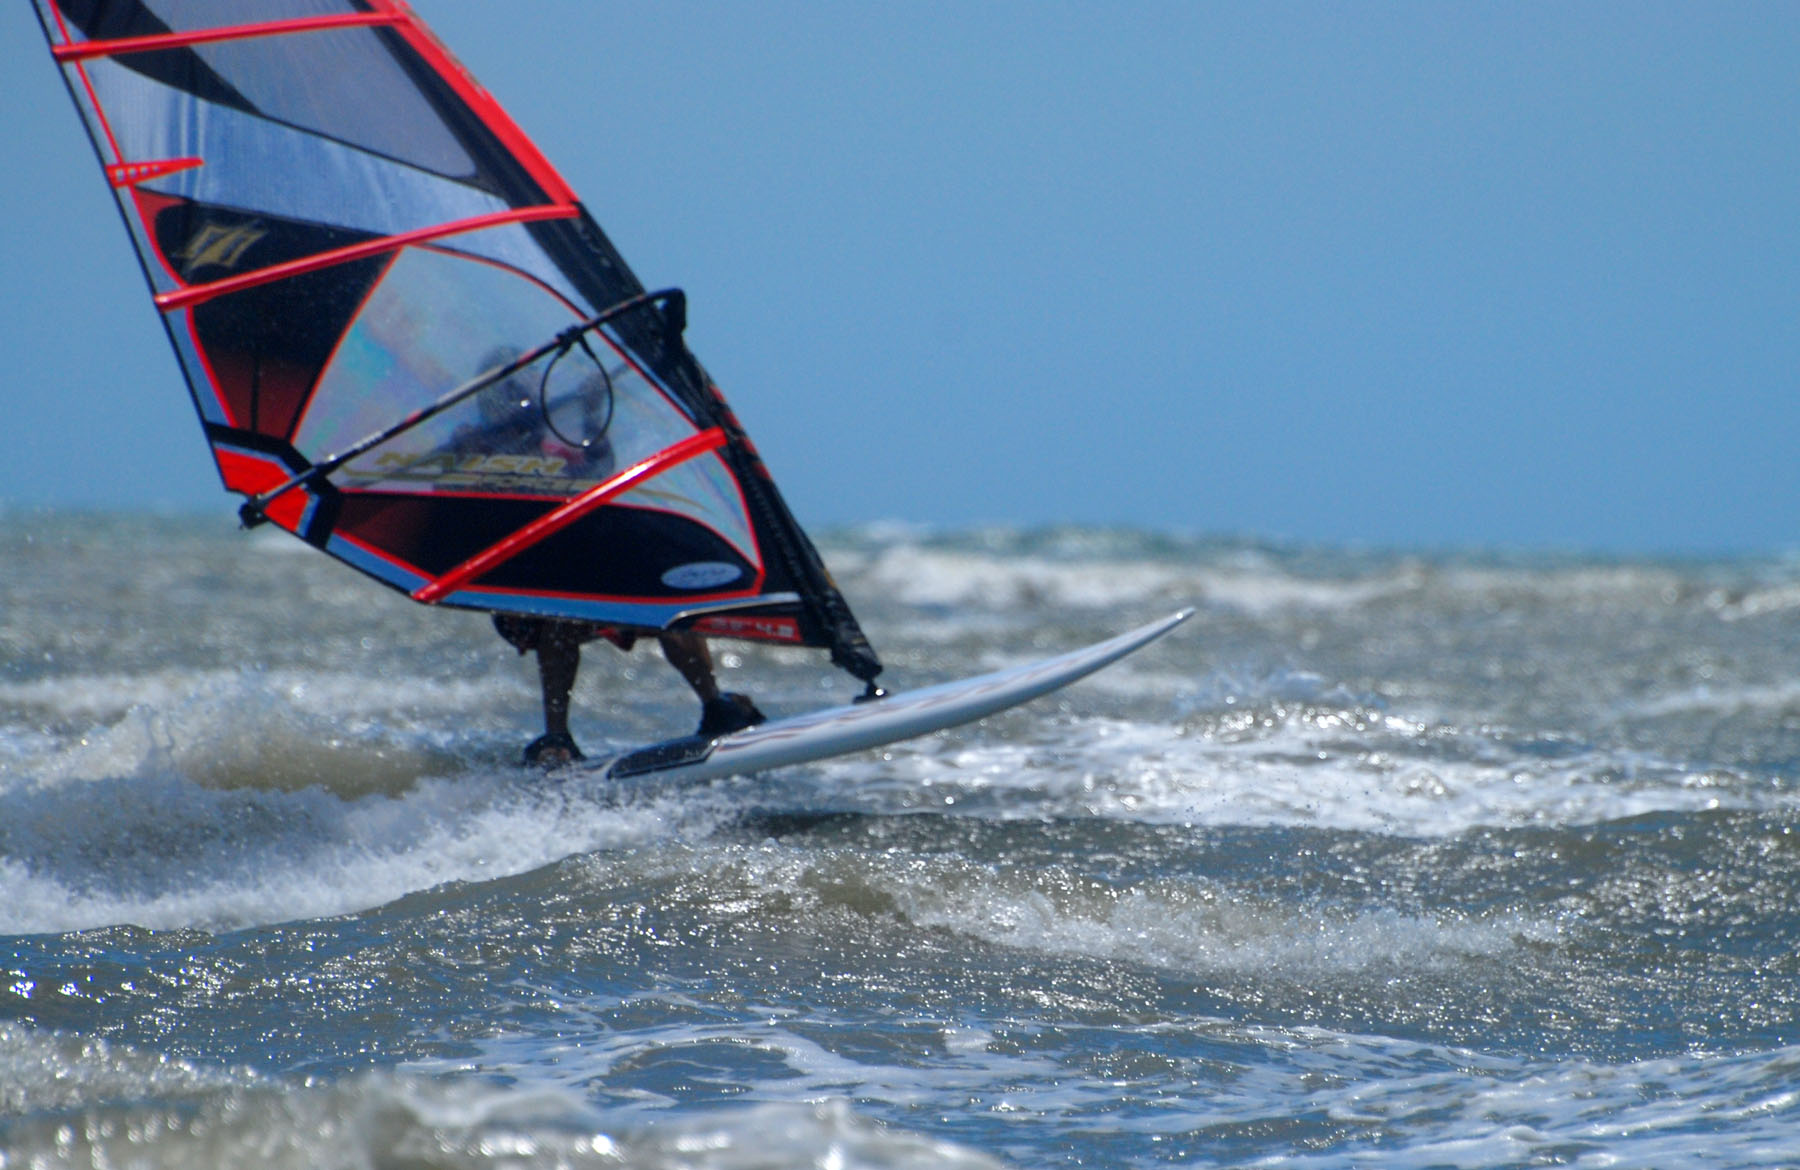 a windsurfer in the ocean riding the waves